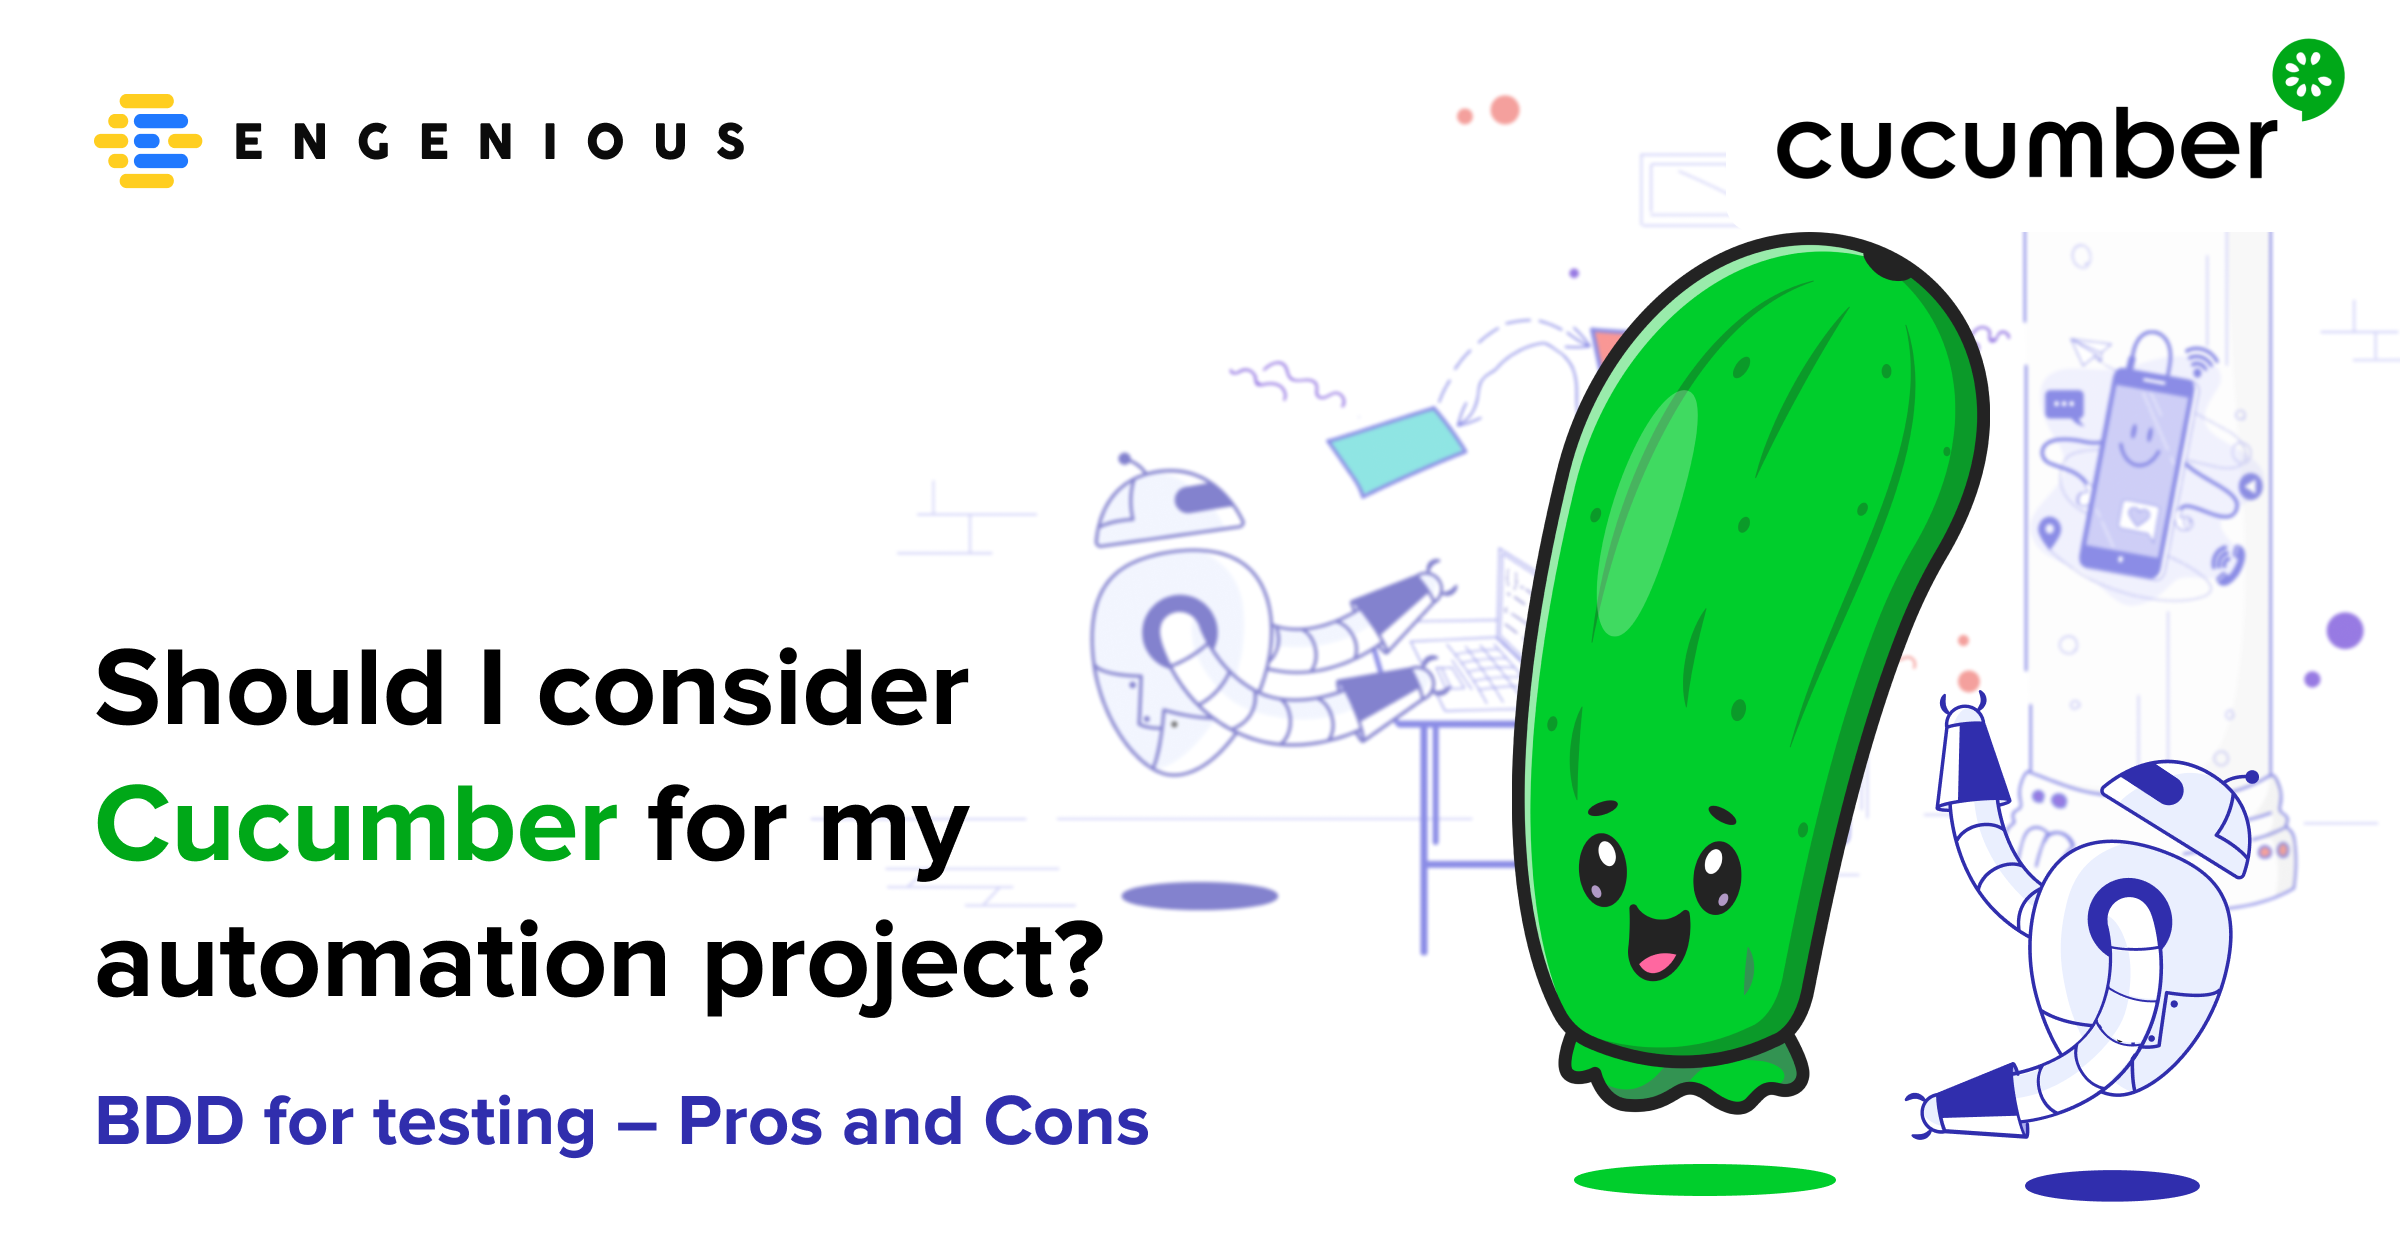 Should I consider Cucumber for my automation project?